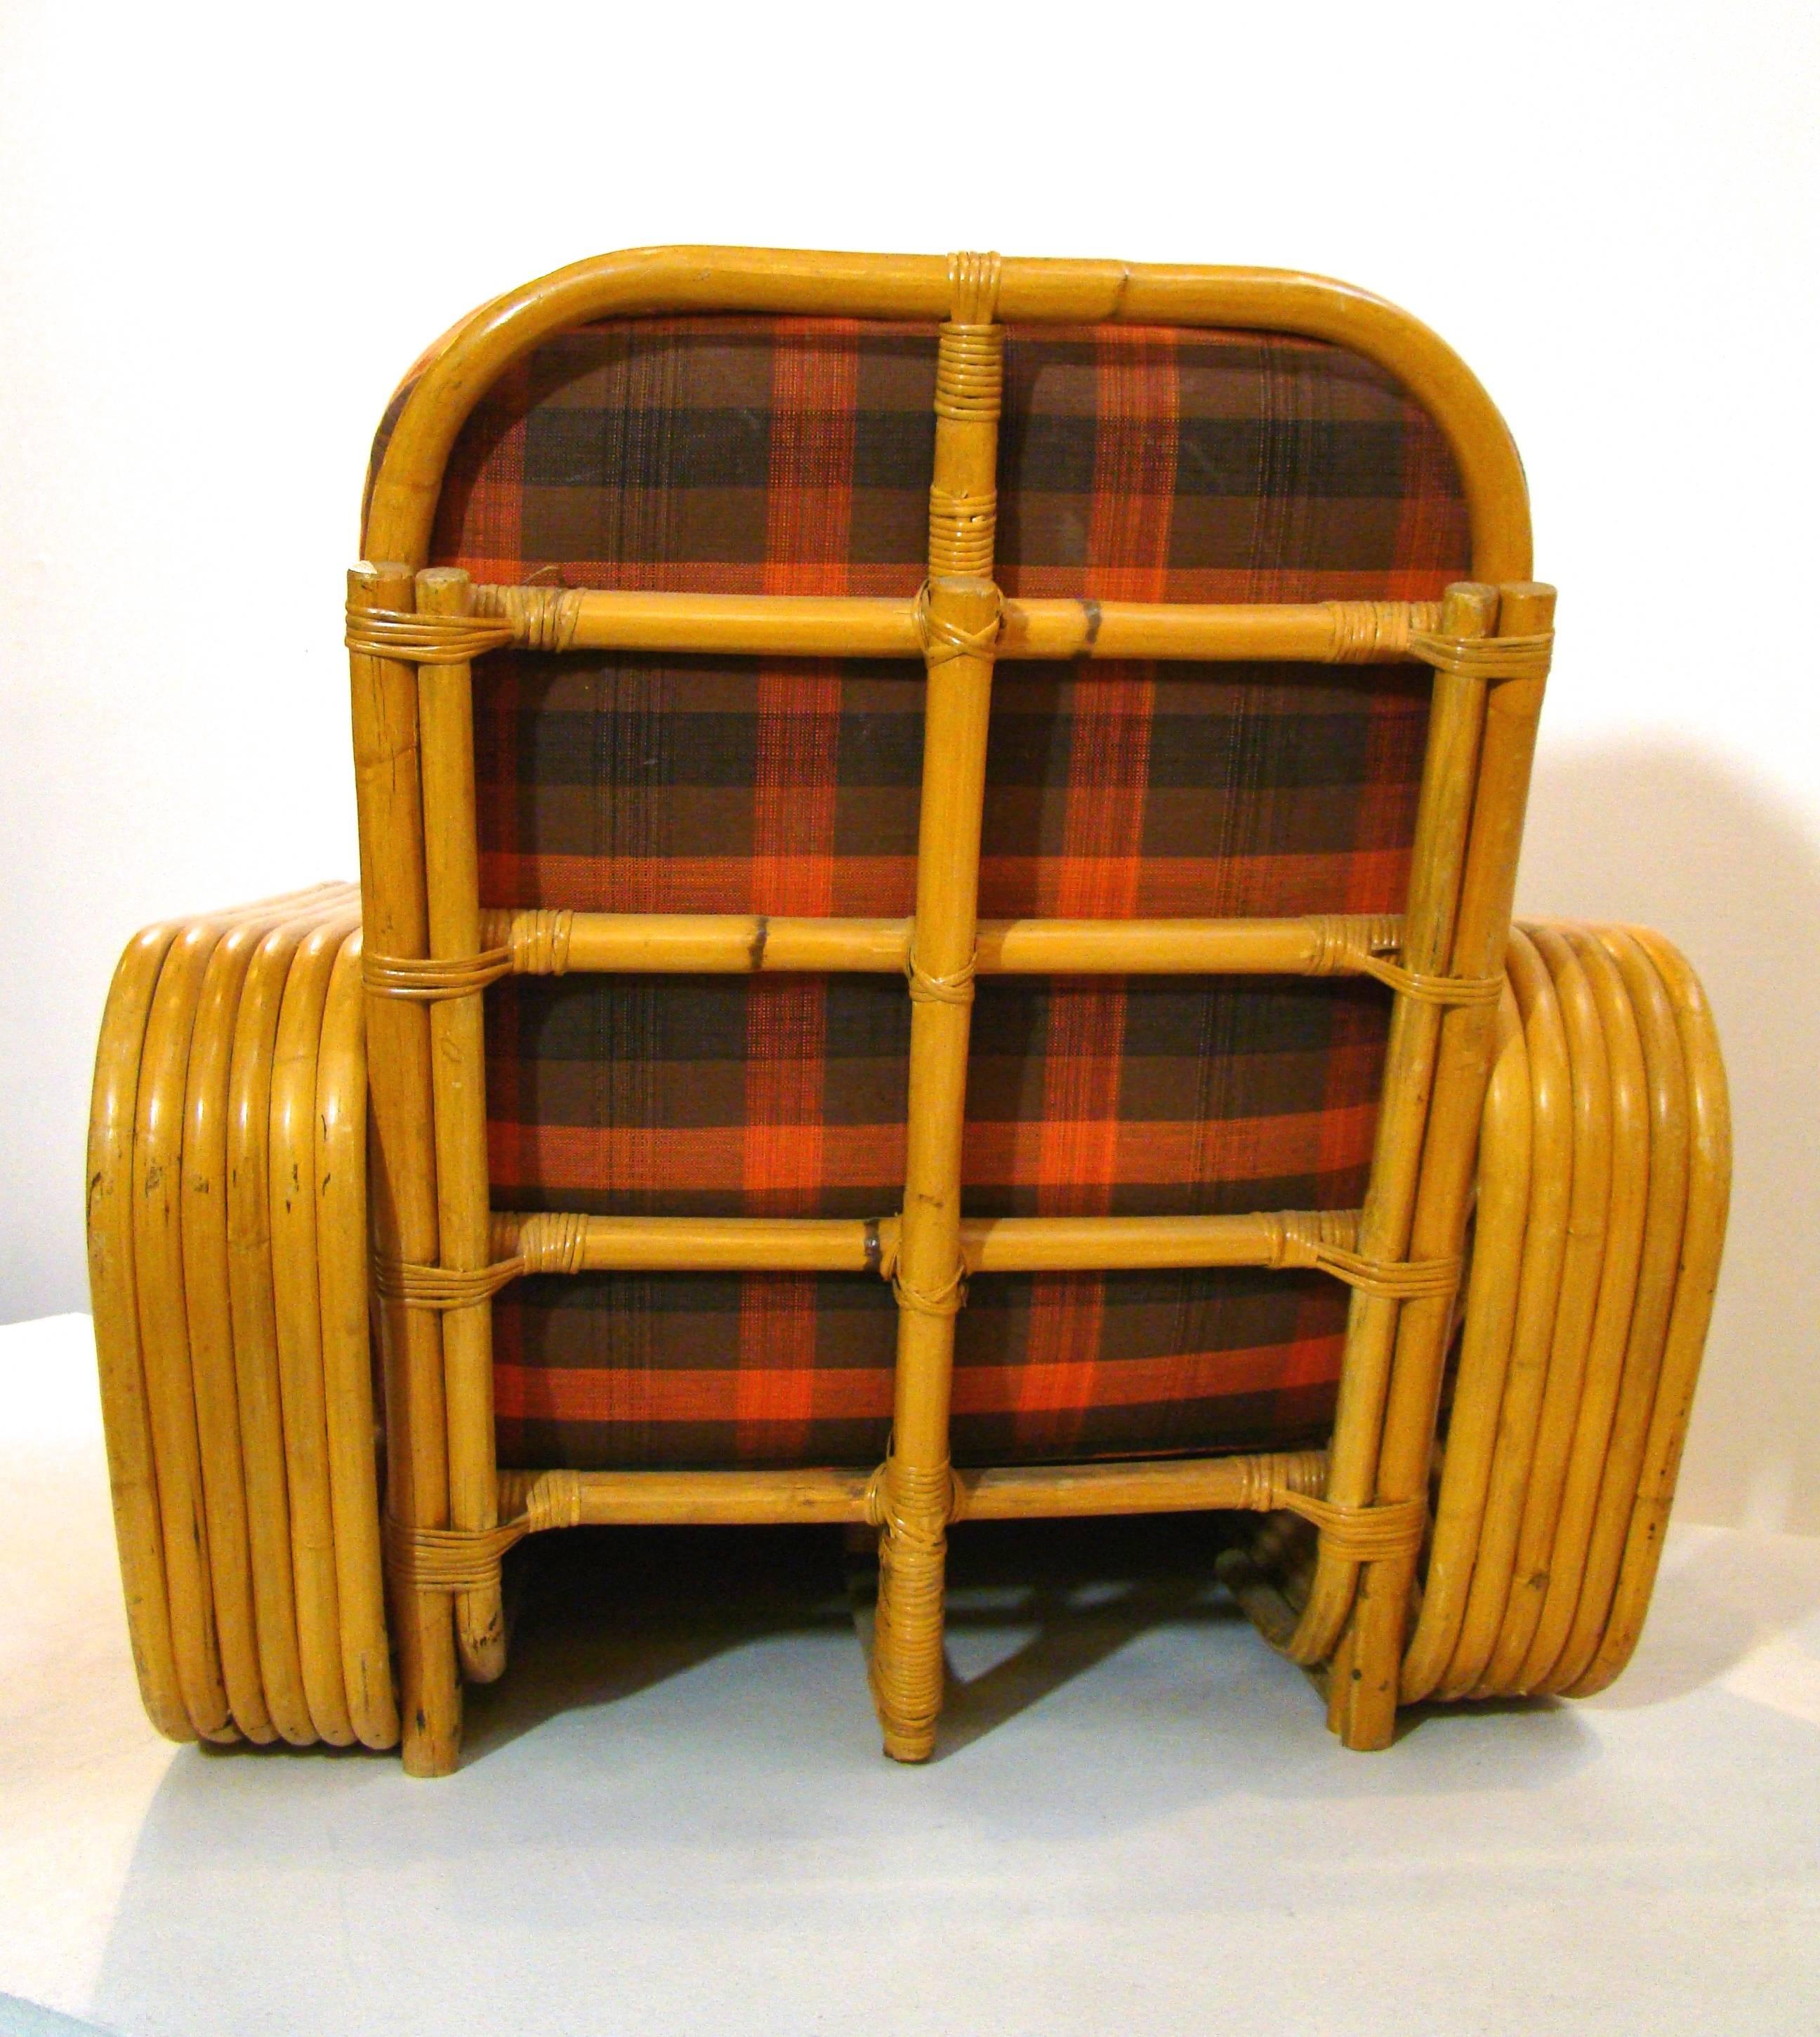 Luxurious Frankl style lounge chair and ottoman in original vintage plaid upholstery. Entire suite of this furniture is available (see end image). We are listing each piece separately.